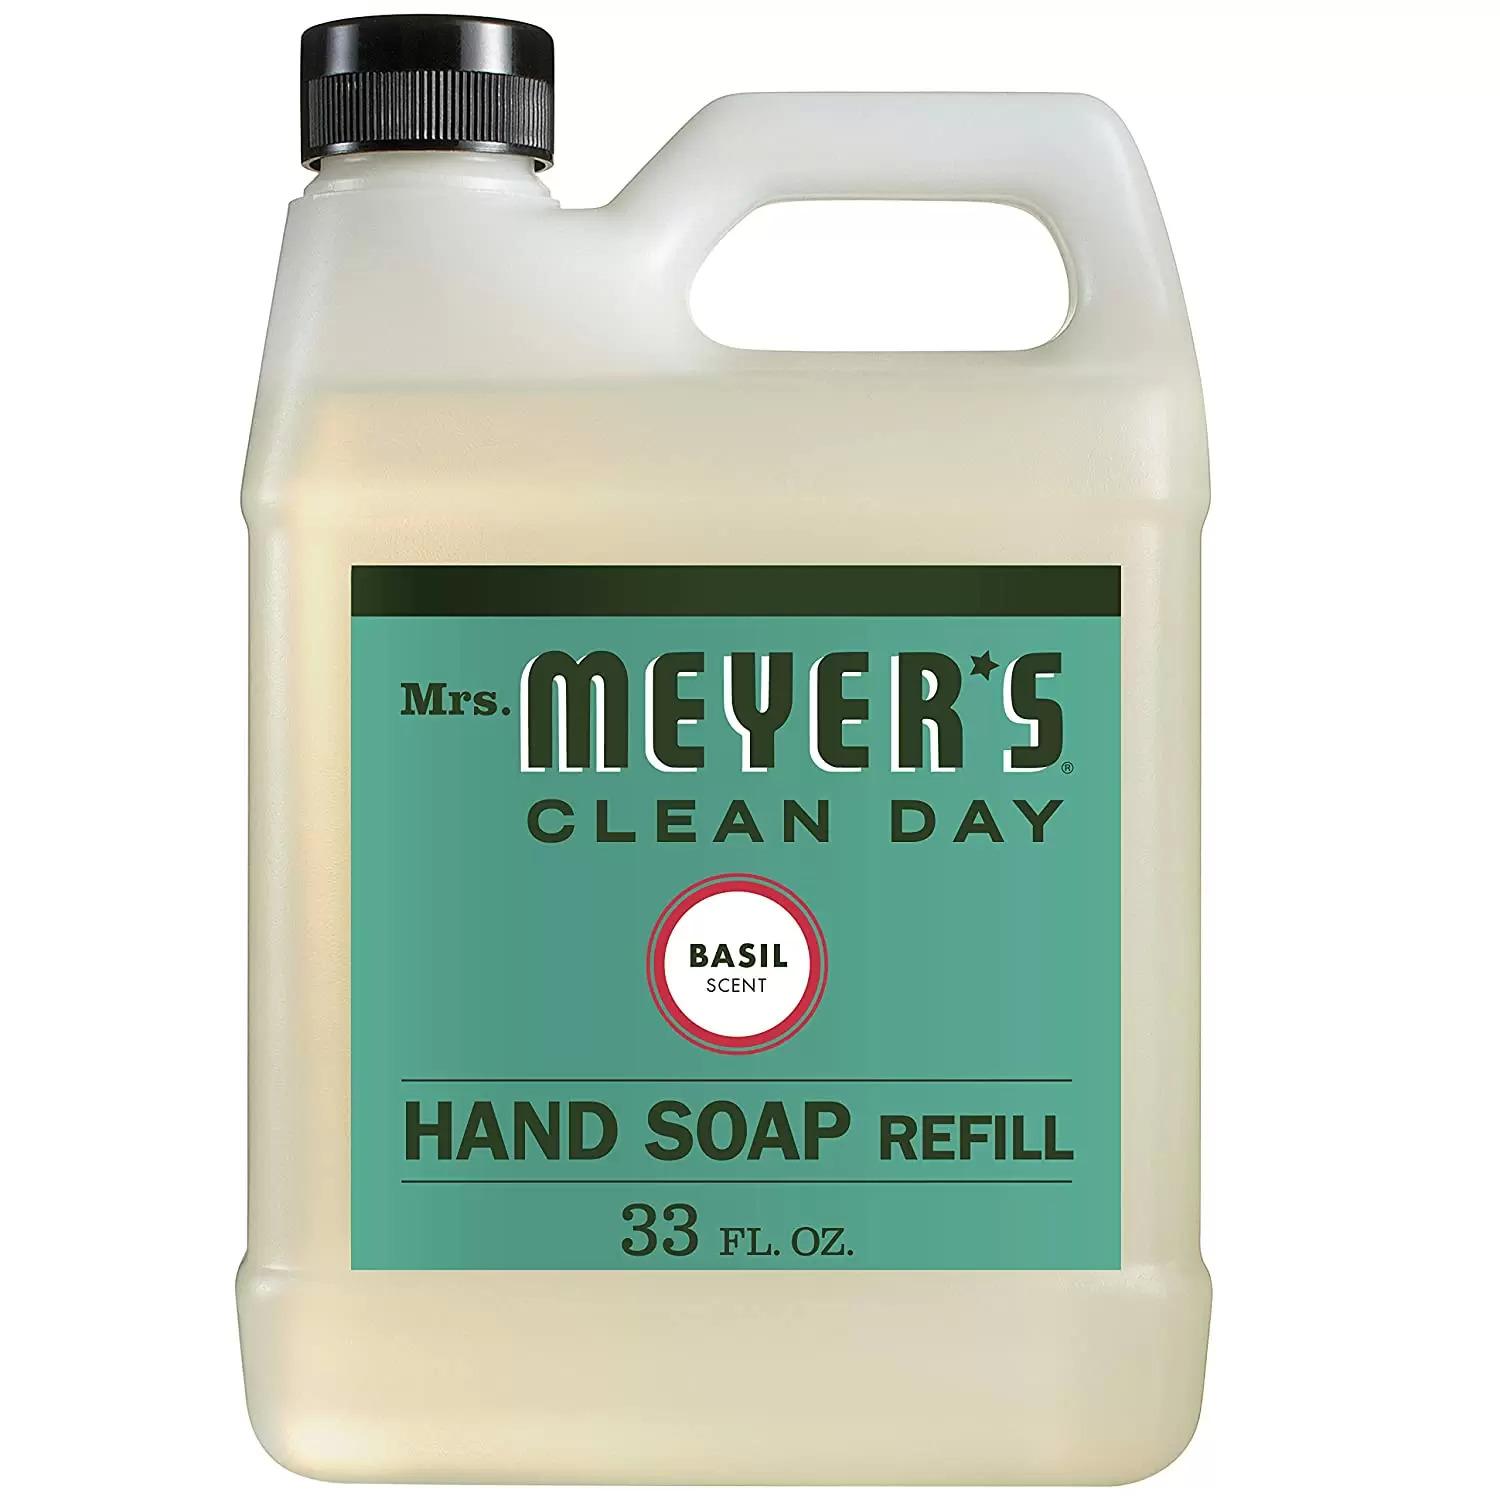 Mrs Meyers Clean Day Liquid Hand Soap Refill Basil for $4.87 Shipped